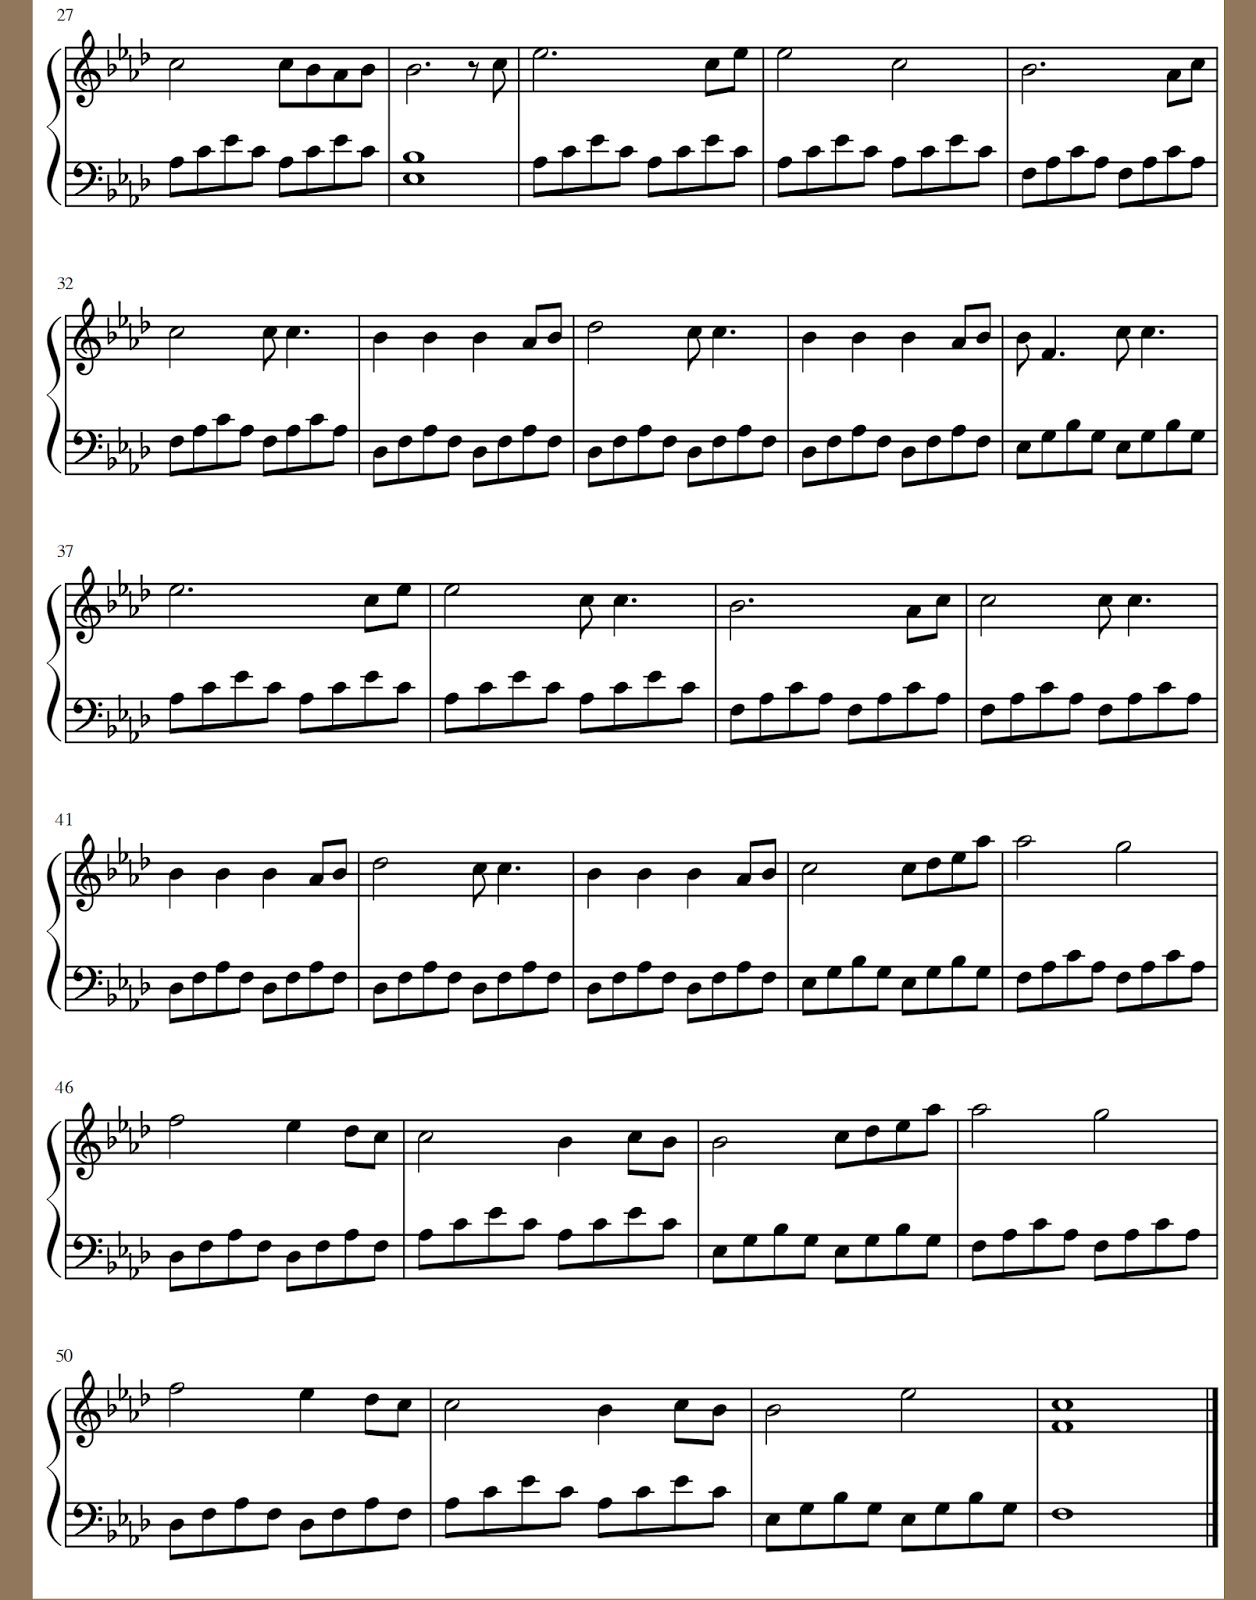 All Of Me Piano Sheet Music Free Music Sheet Collection